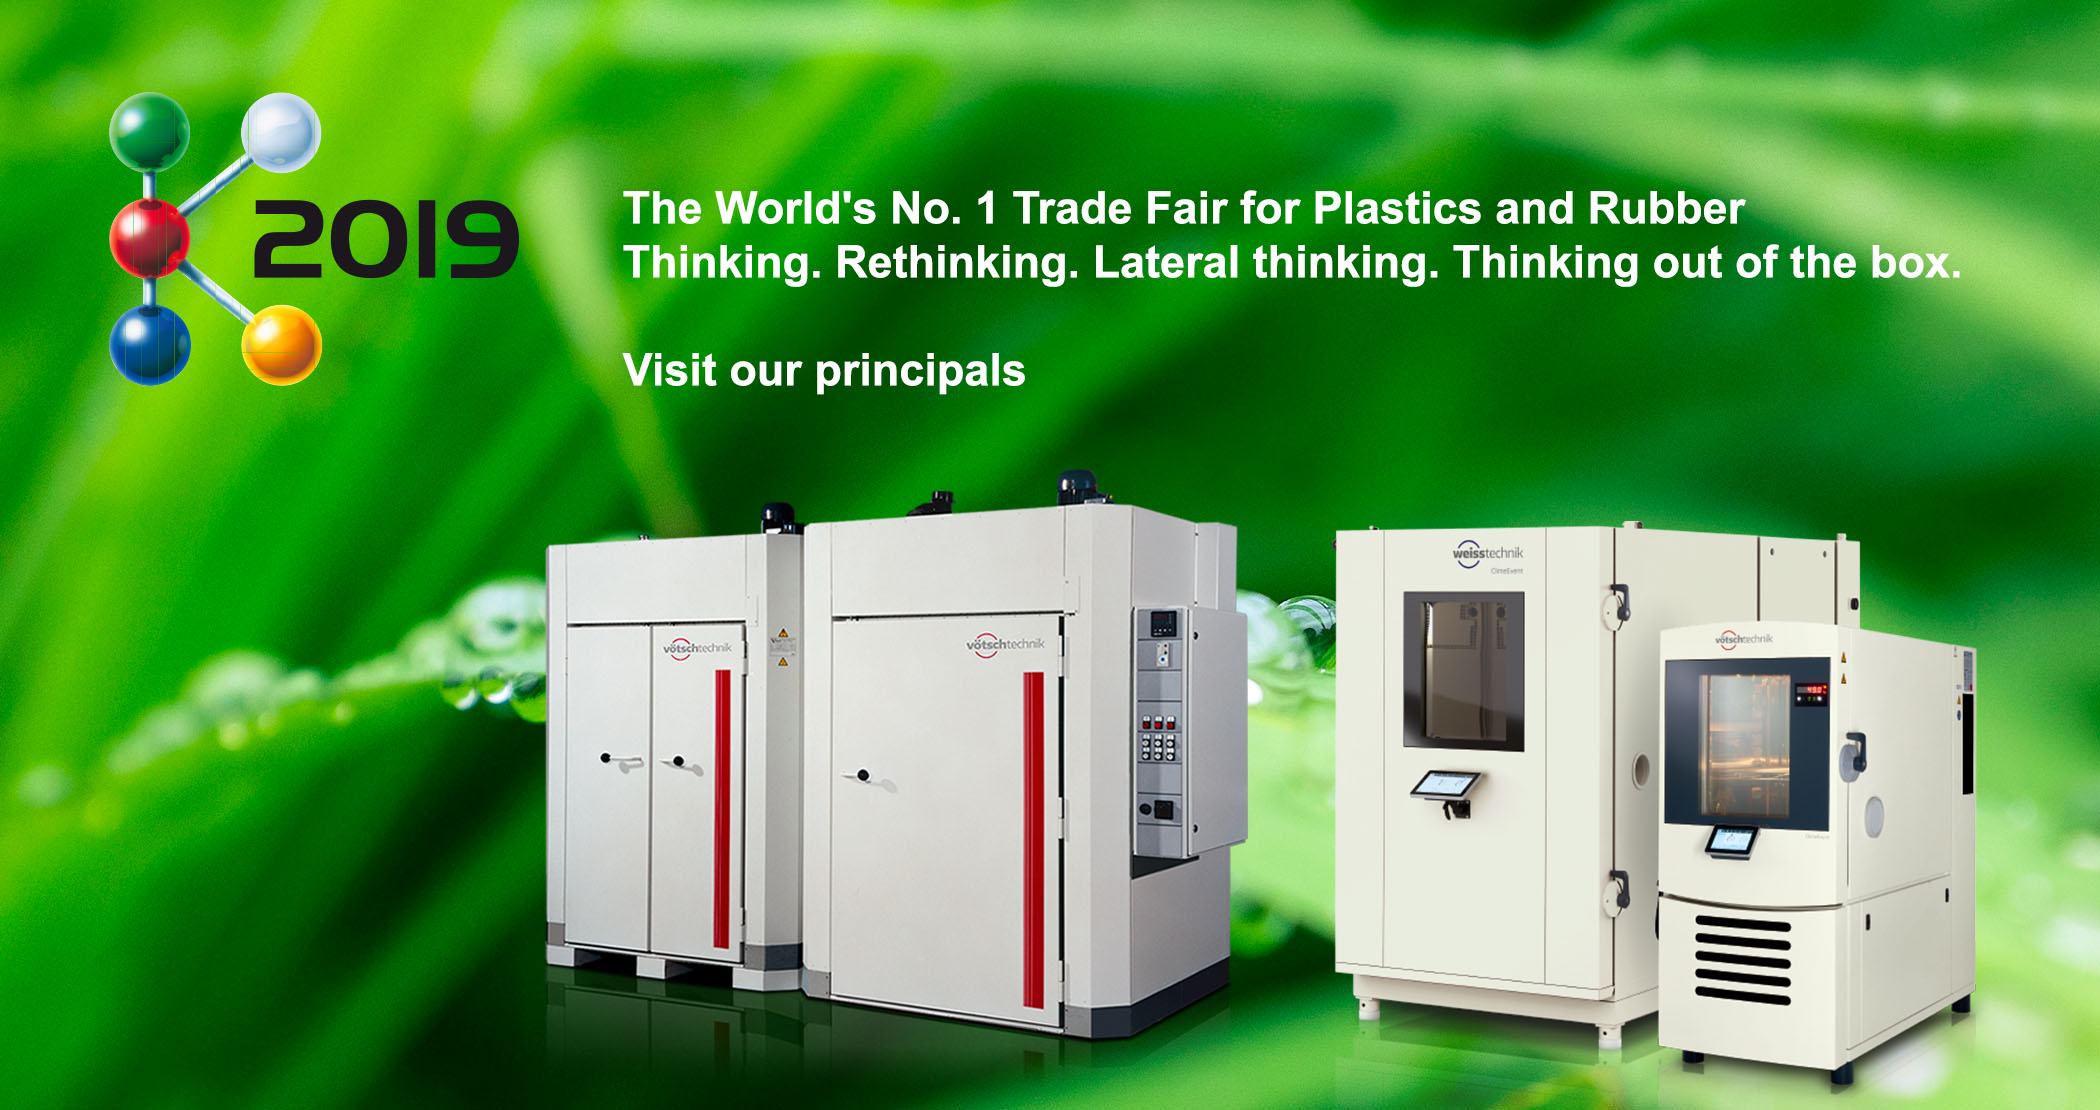 K 2019 Trade Fair for Plastics and Rubber